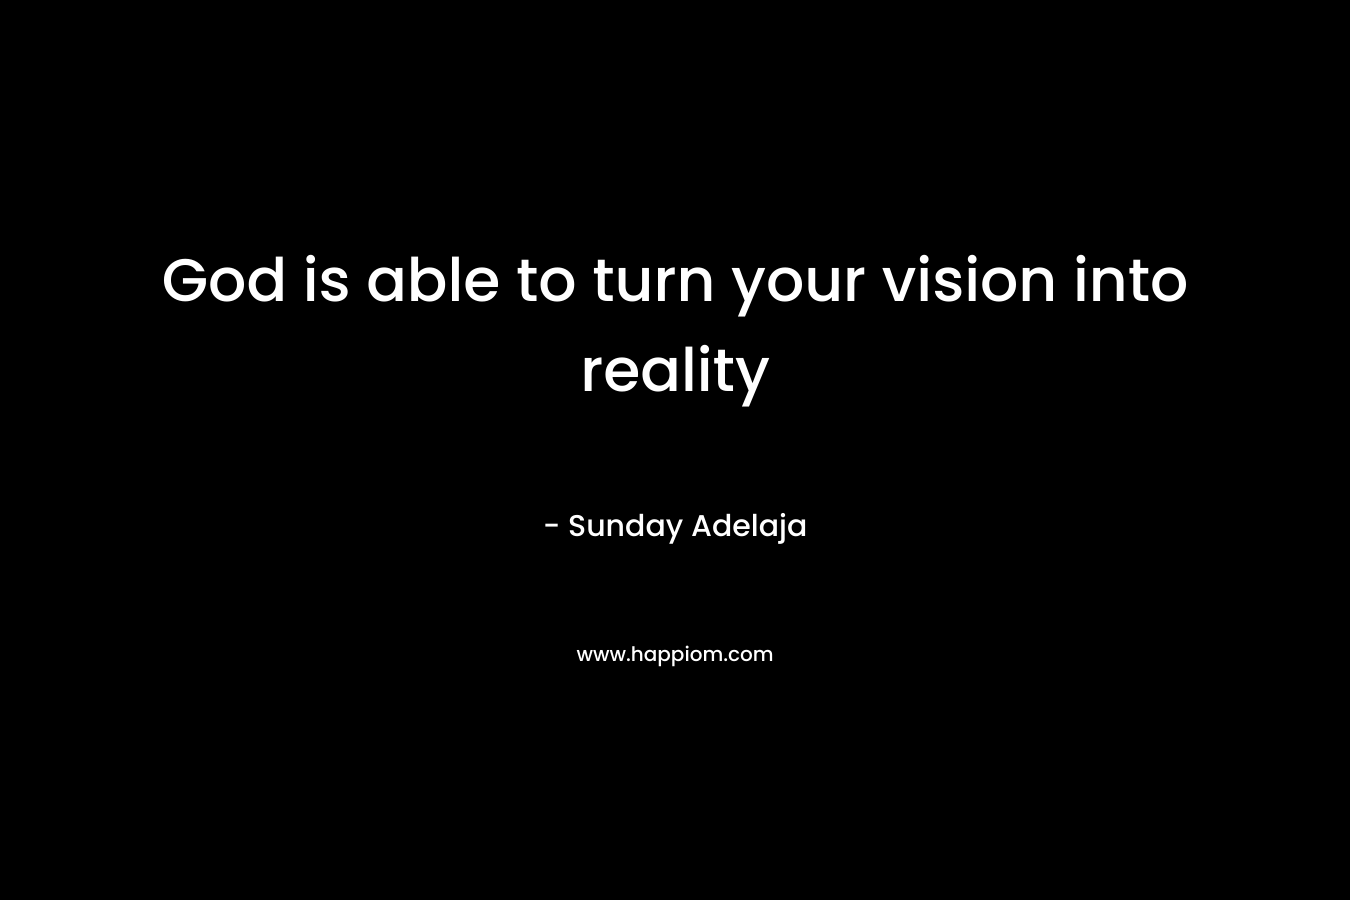 God is able to turn your vision into reality